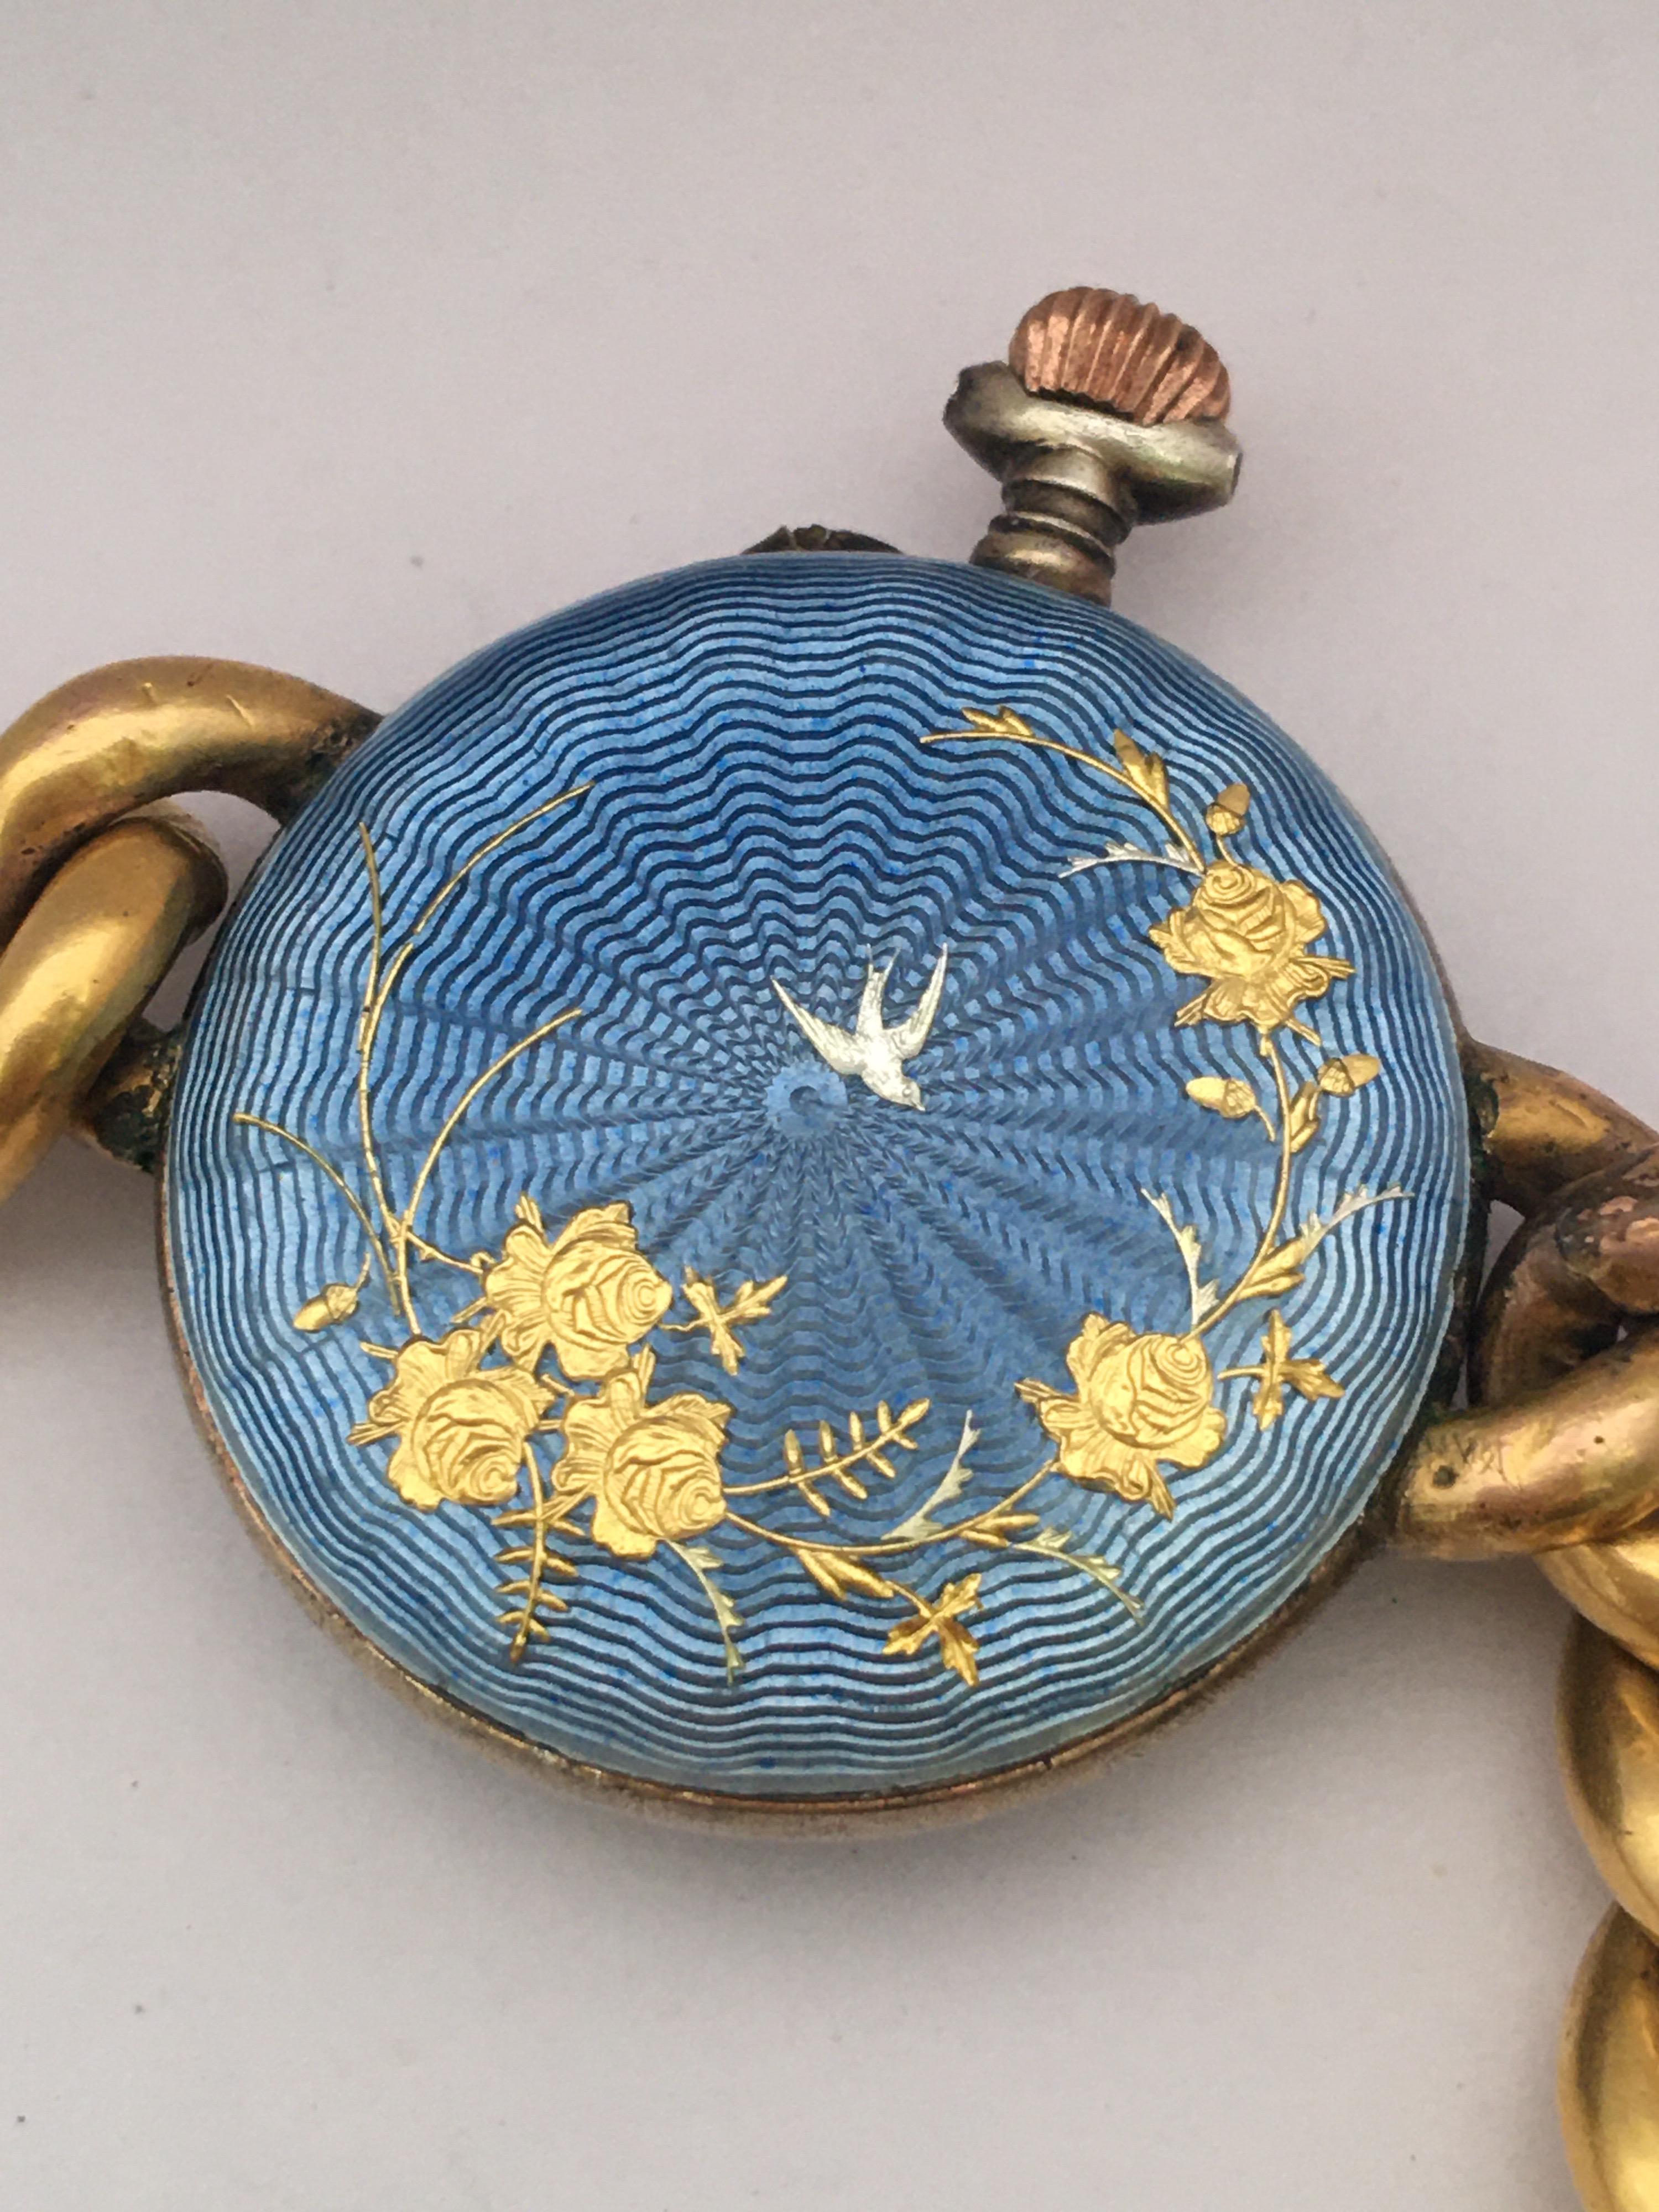 This beautiful antique silver blue enamel ladies trench watch is not working but the balance is good and spinning when move. I think it needs a service which reflect the price. Visible signs of ageing and wear with light marks on the glass as shown,